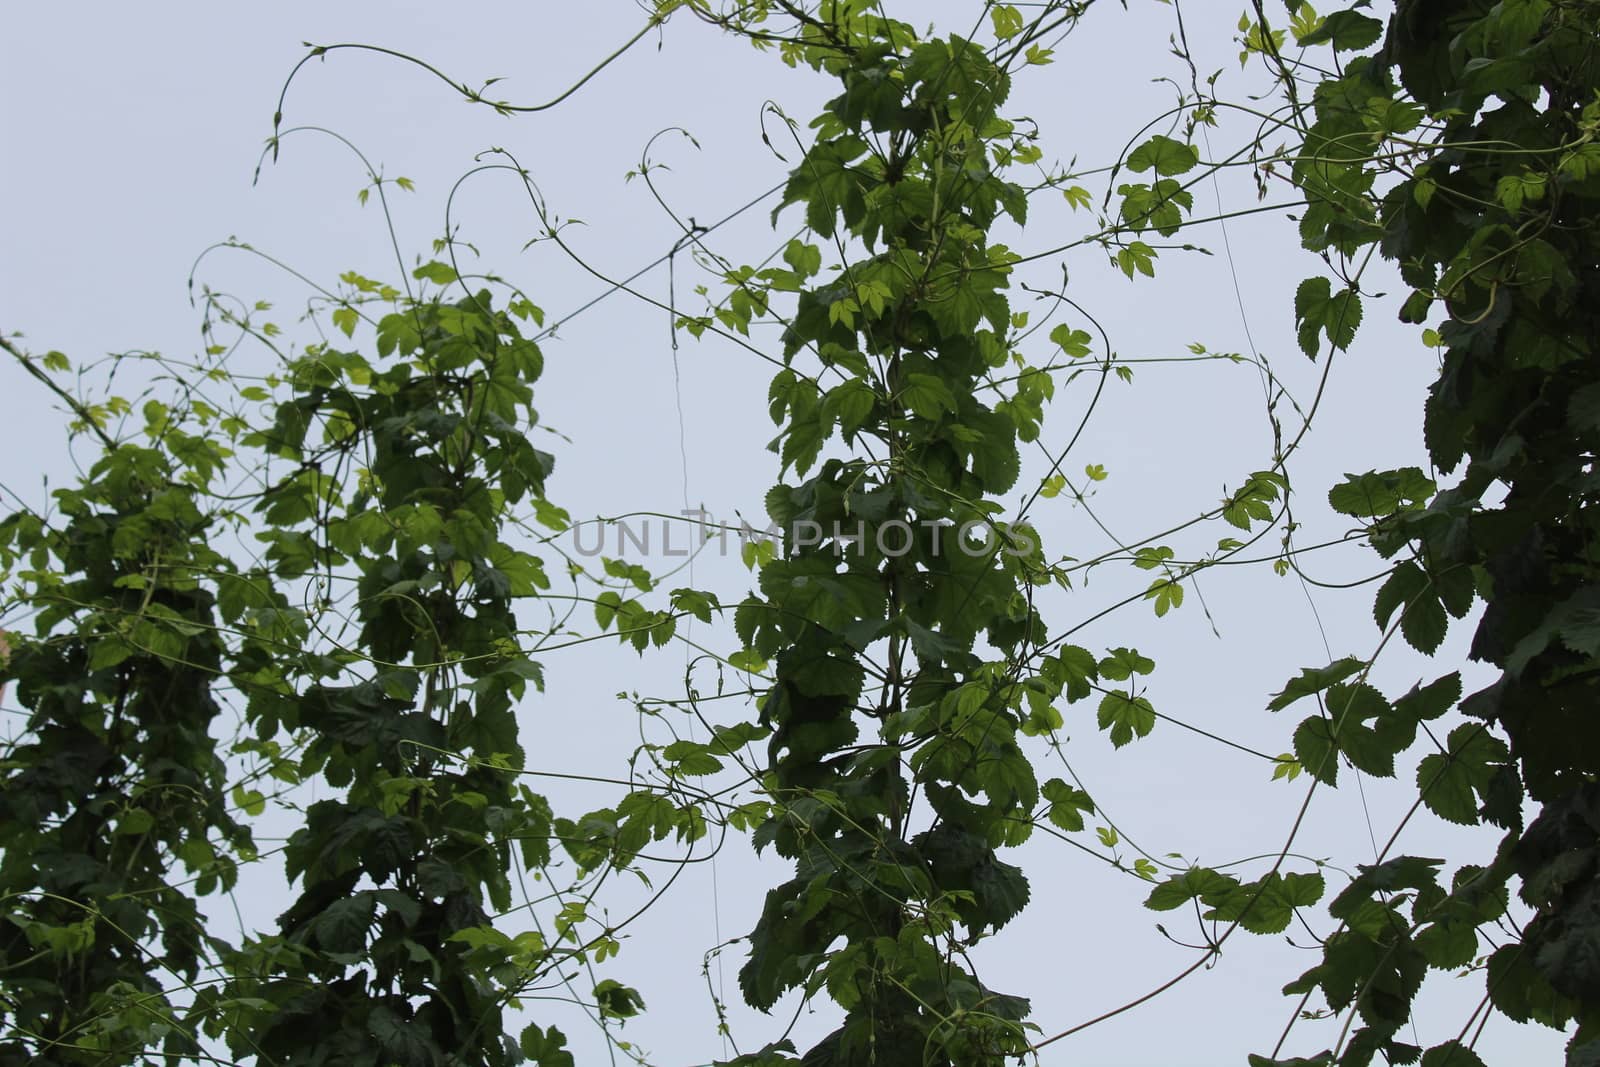 The picture shows hop plants in the garden